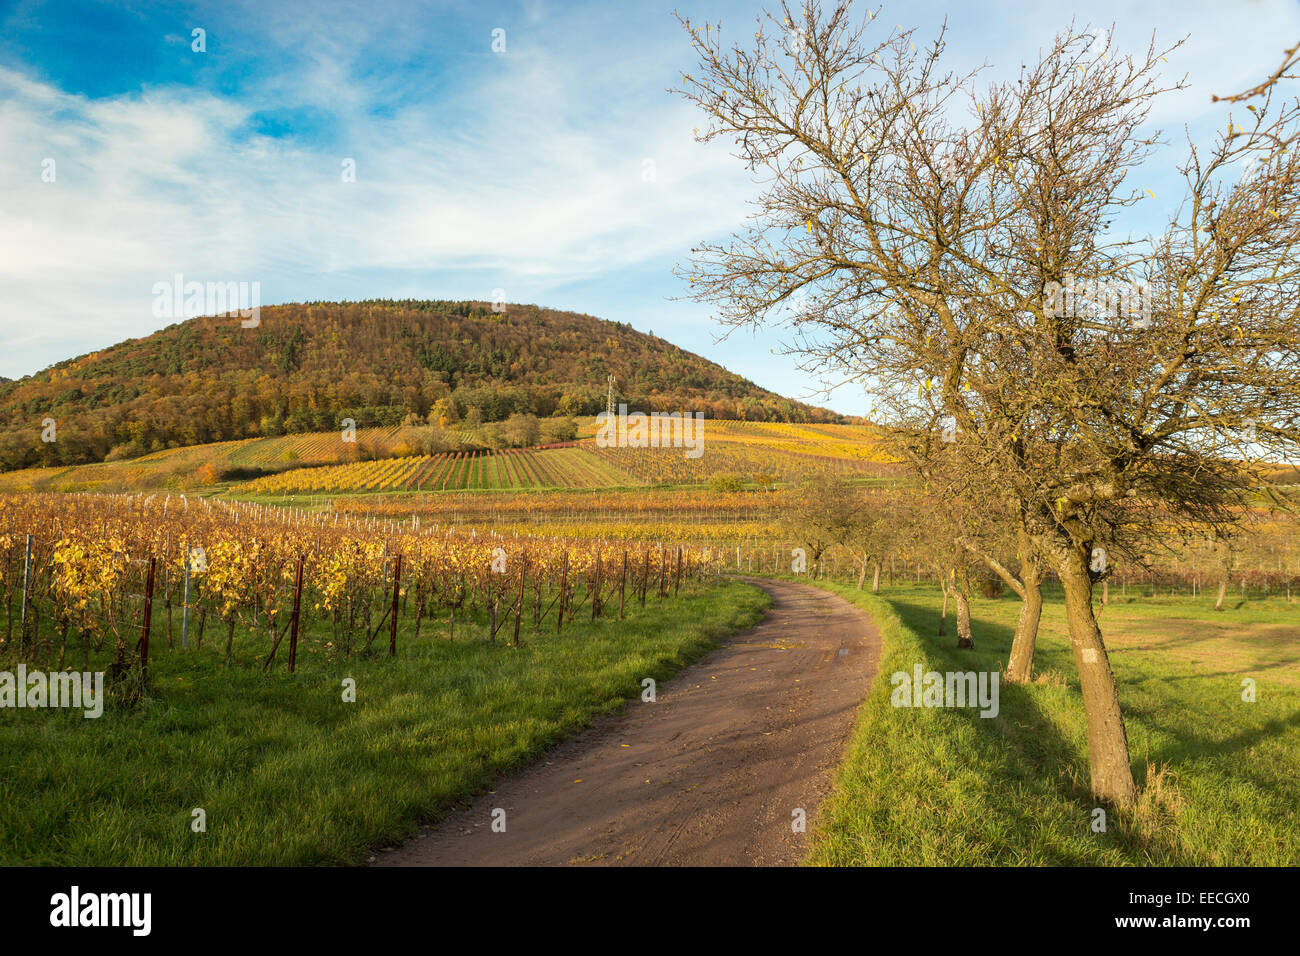 Vineyards in Pfalz at autumn time, Germany Stock Photo